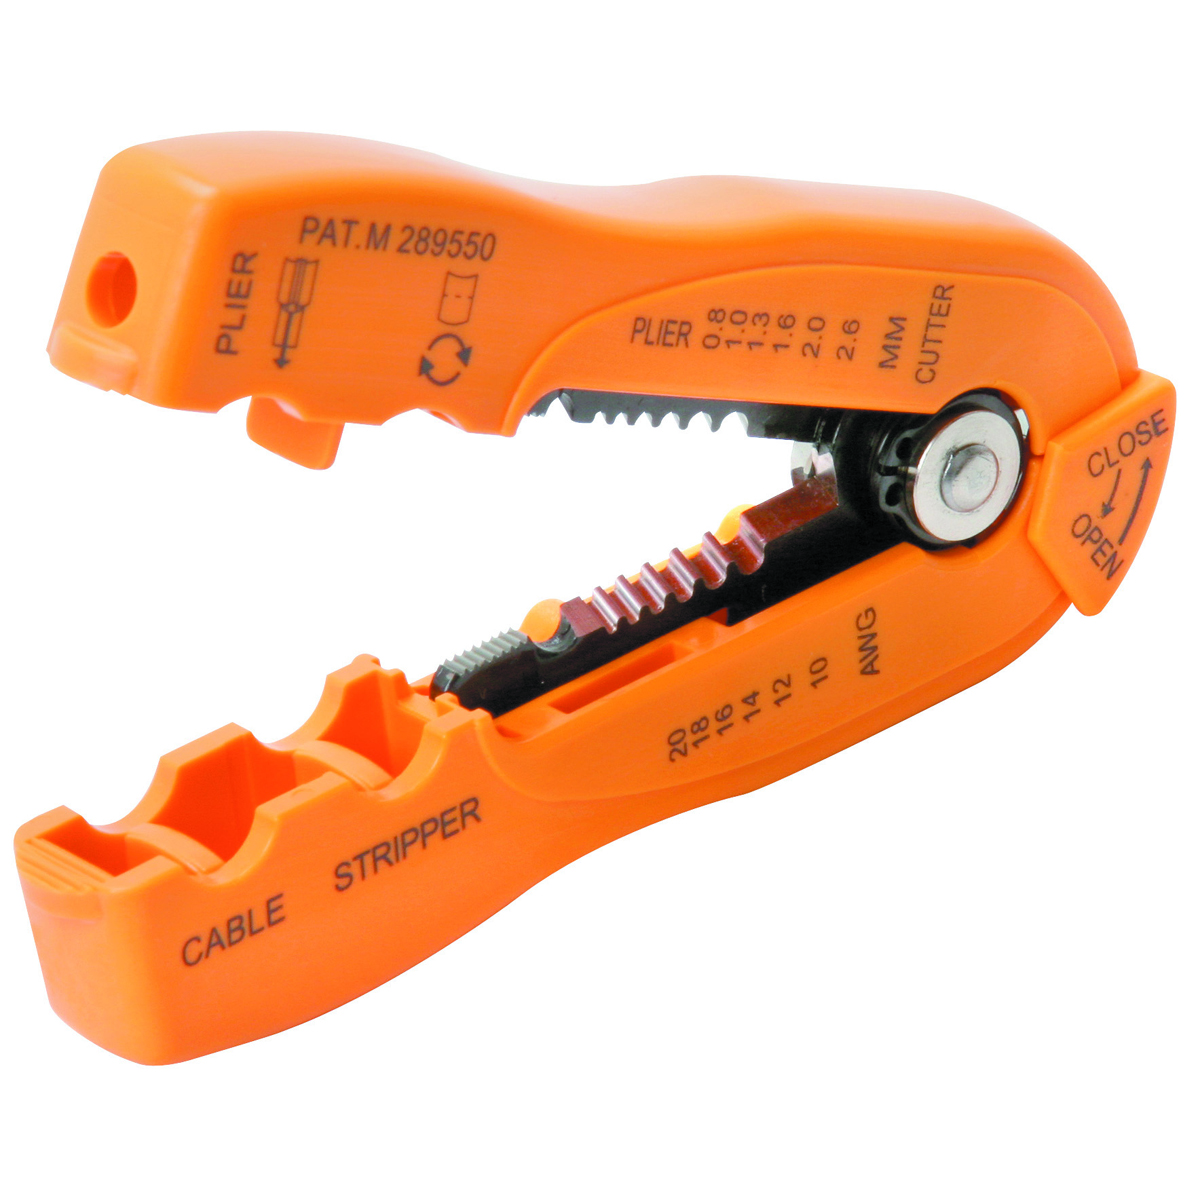 PITTSBURGH Wire and Cable Stripper - Item 96158